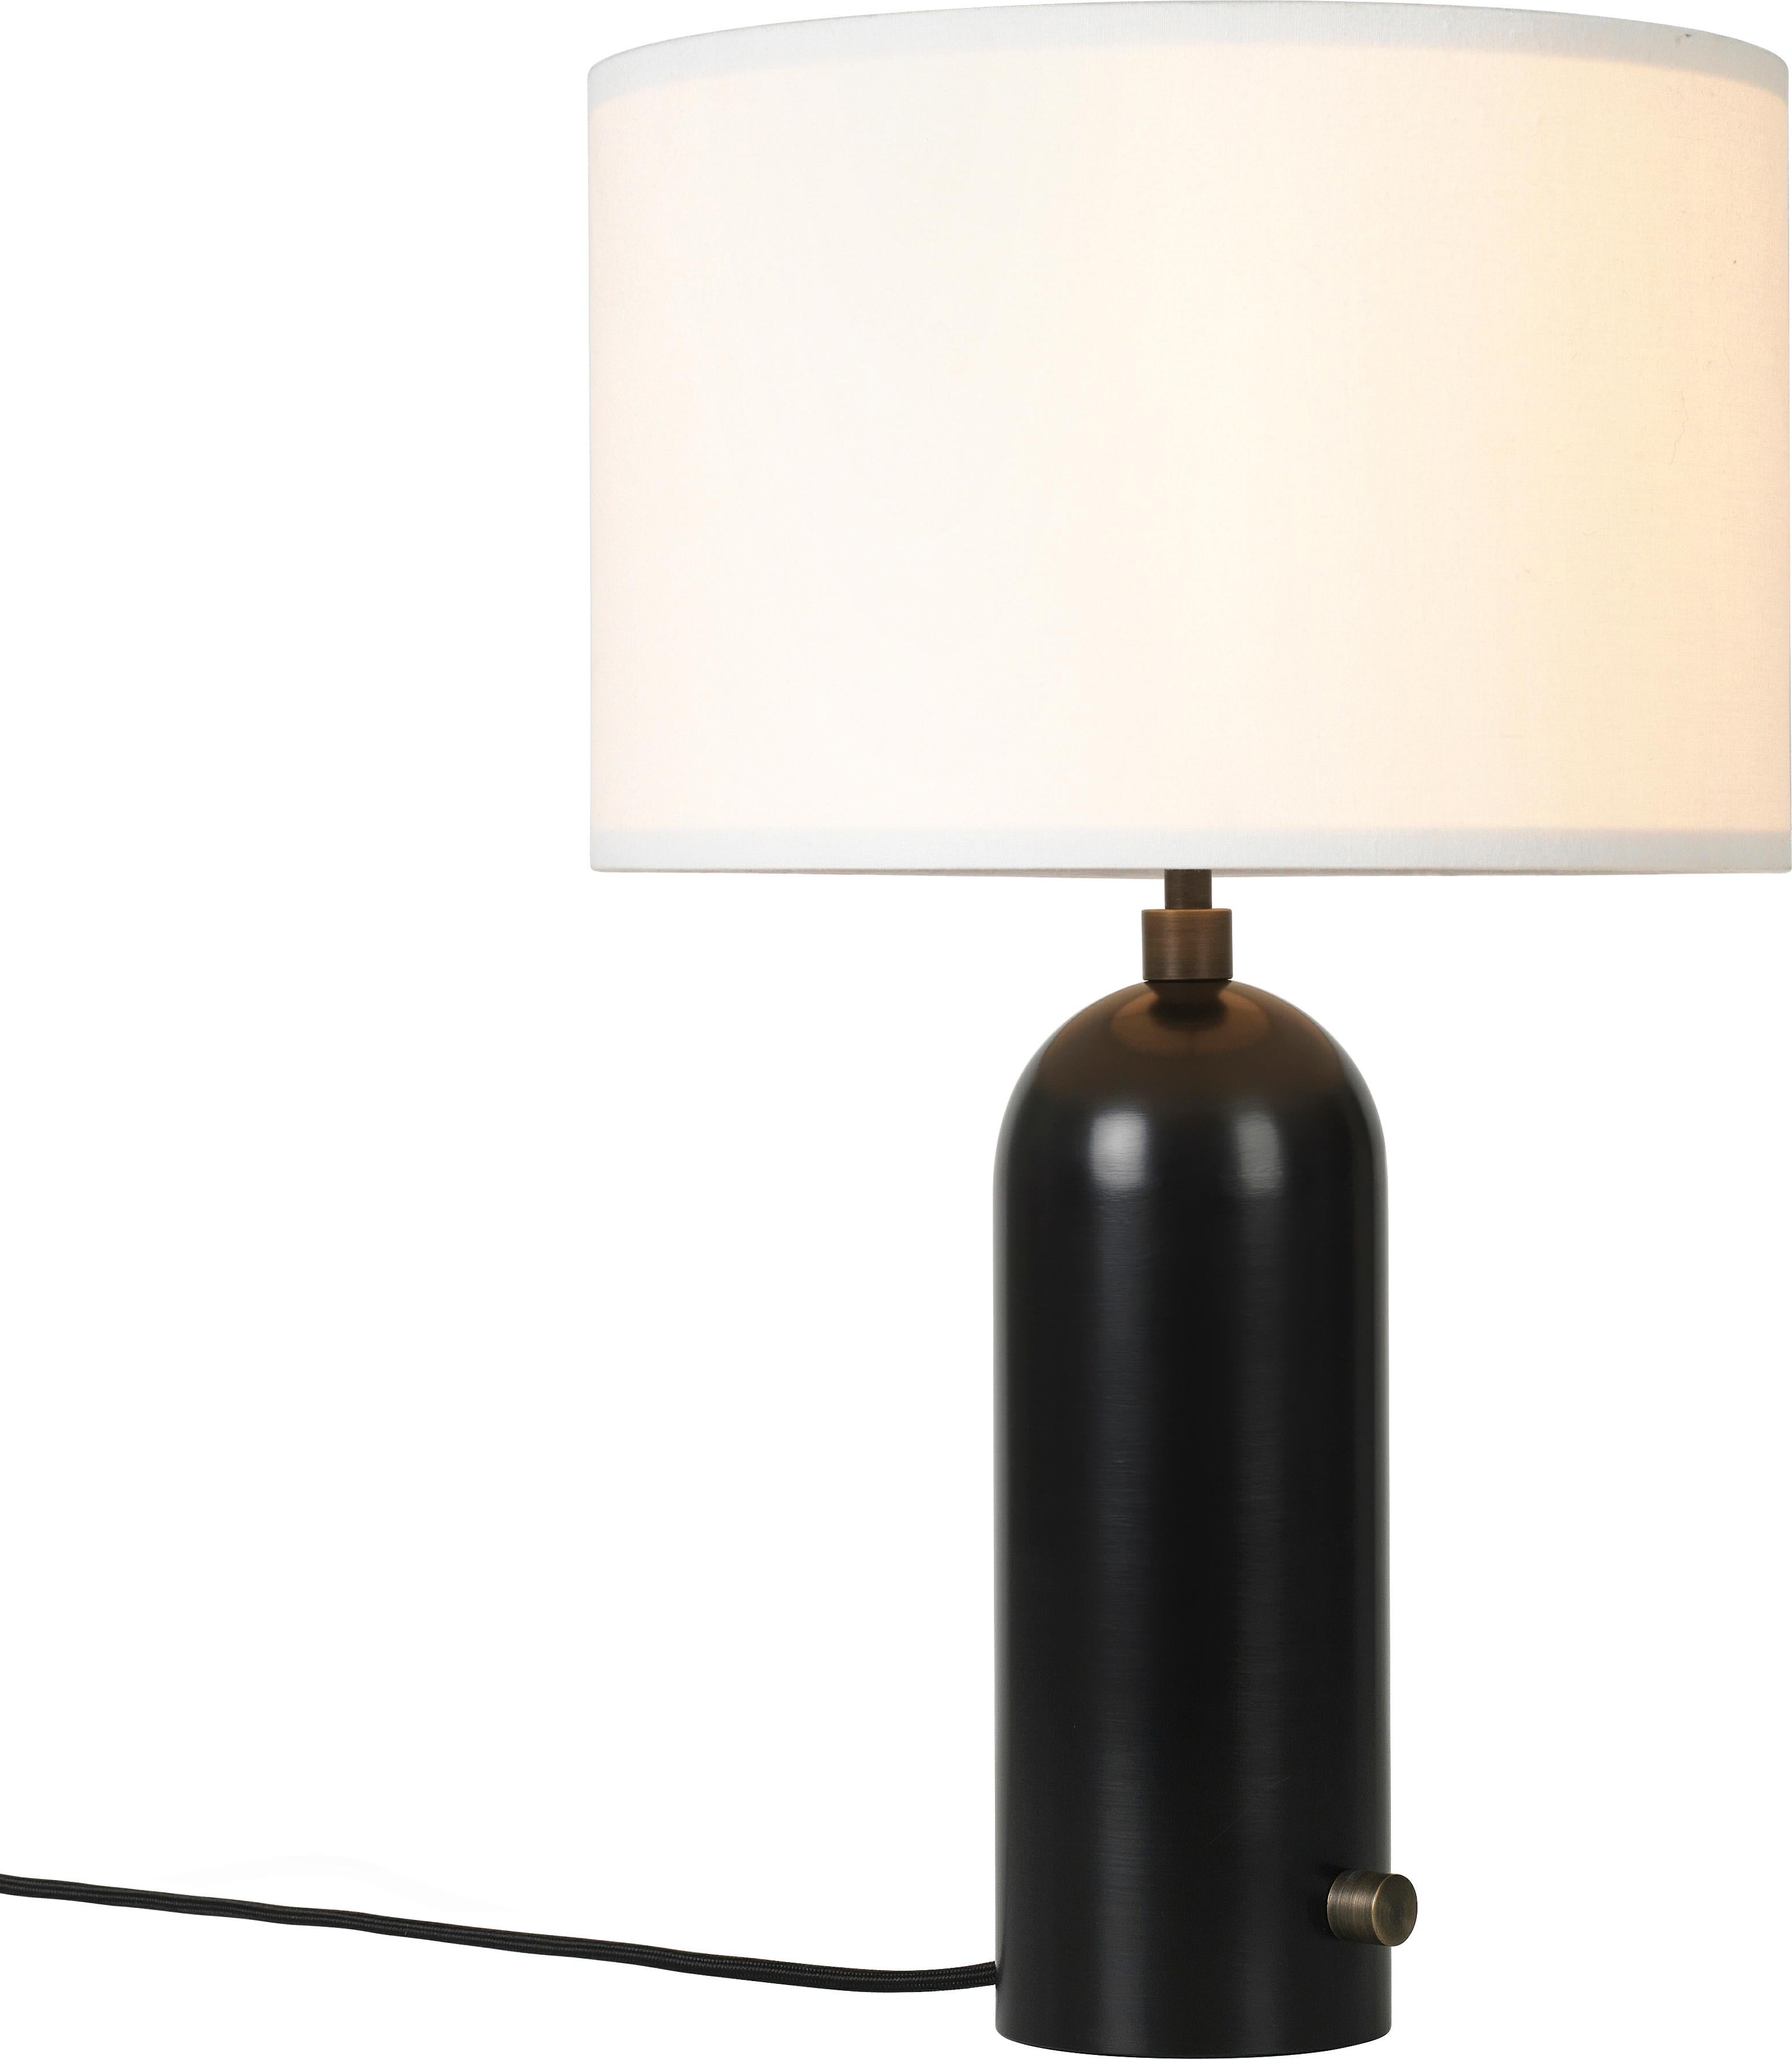 Large 'Gravity' Marble Table Lamp by Space Copenhagen for Gubi in Black For Sale 12